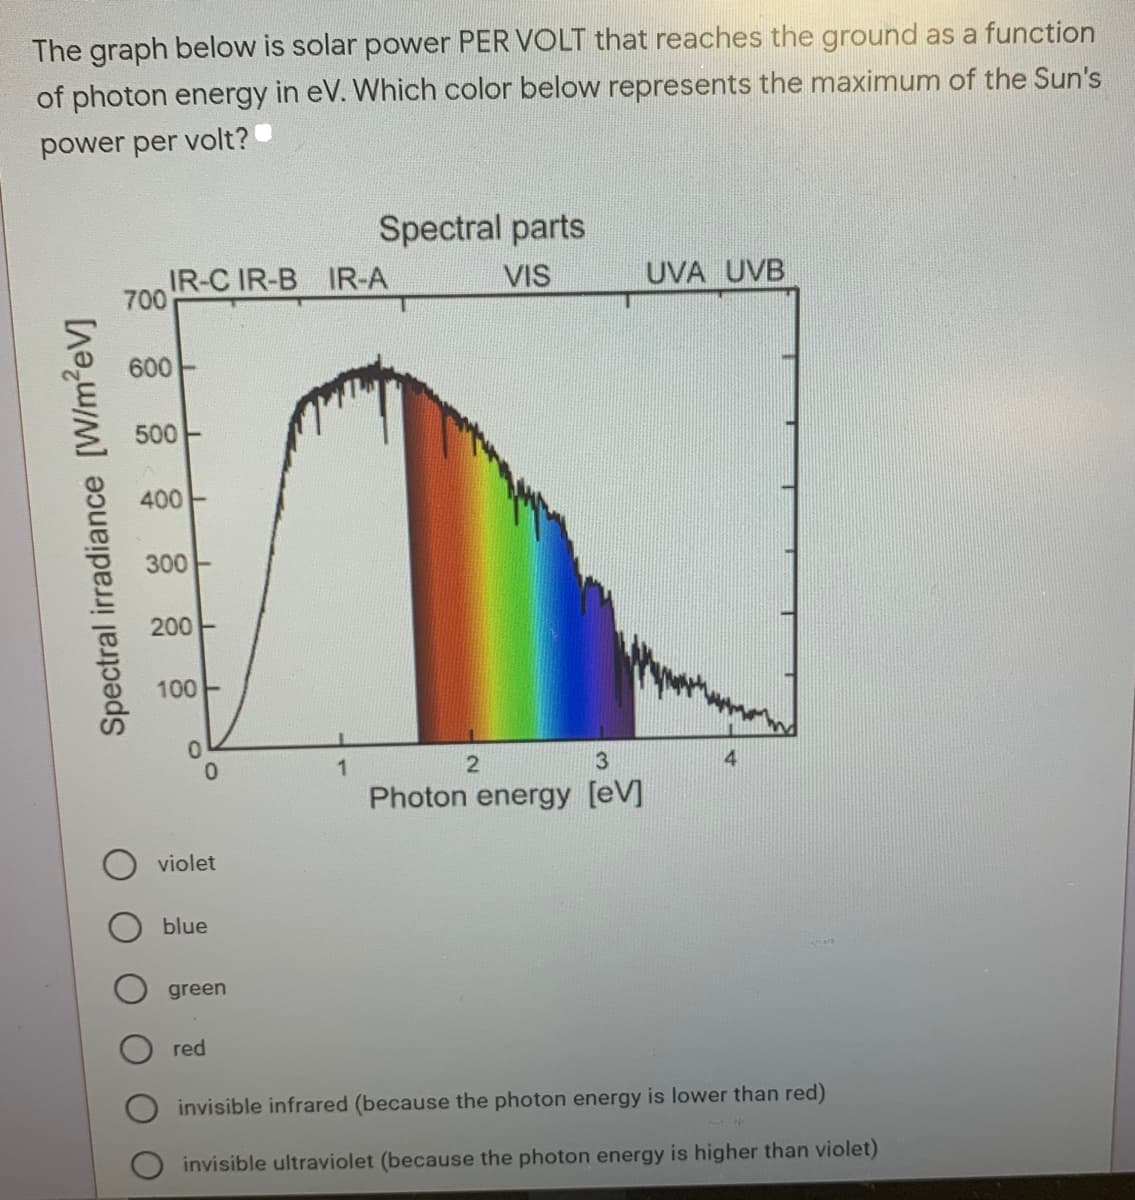 The graph below is solar power PER VOLT that reaches the ground as a function
of photon energy in eV. Which color below represents the maximum of the Sun's
power per volt?
Spectral parts
IR-C IR-B IR-A
700
VIS
UVA UVB
600
500
400
300
200
100-
3
Photon energy [eV]
violet
blue
green
red
invisible infrared (because the photon energy is lower than red)
invisible ultraviolet (because the photon energy is higher than violet)
Spectral irradiance [W/m2eV]
